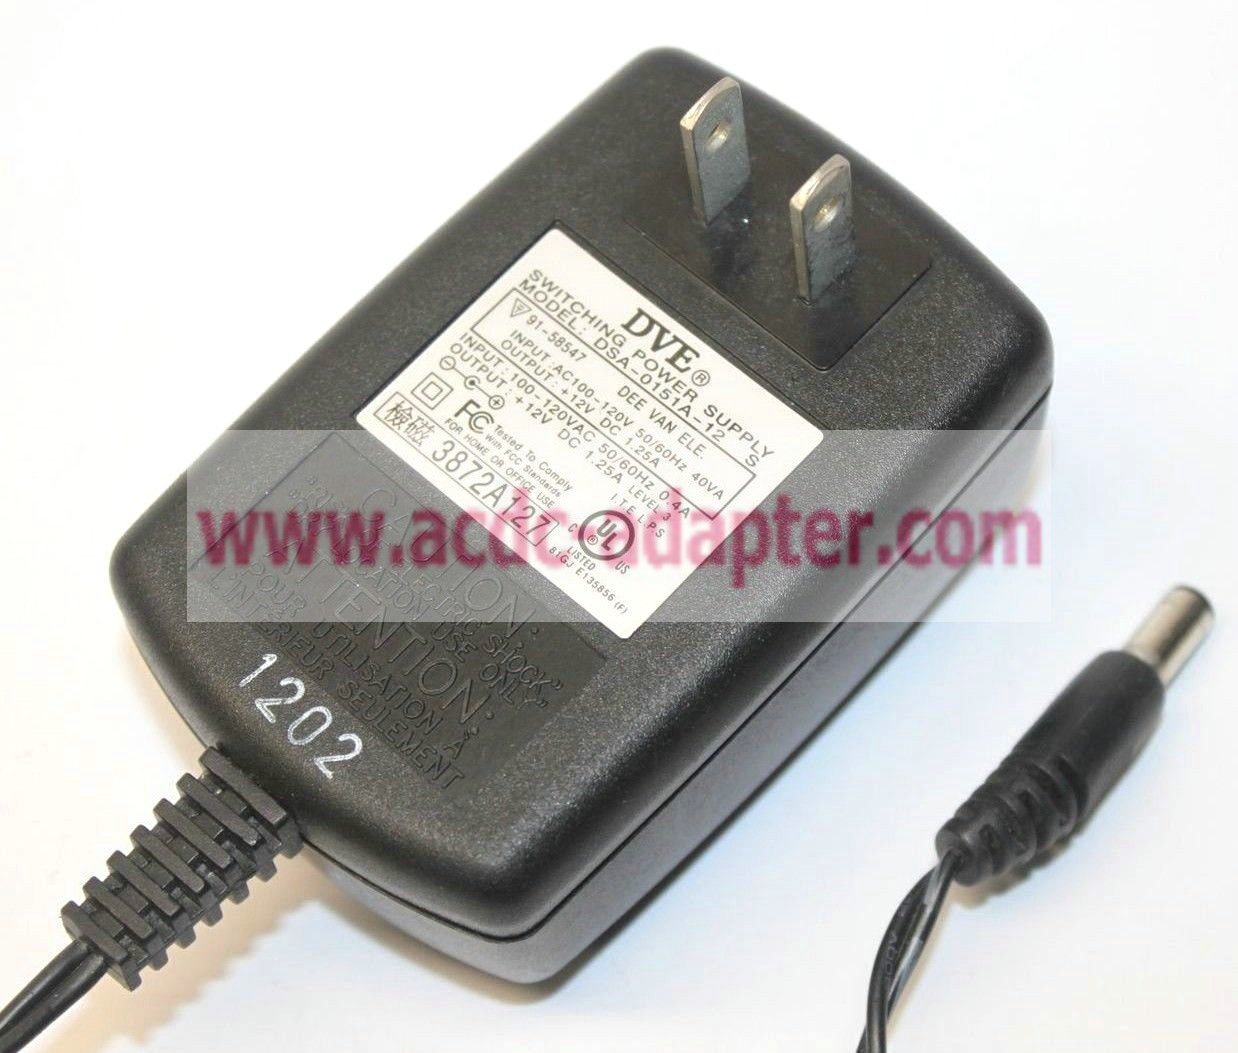 Genuine DVE DSA-0151A-12 12V 1.25A Switching Power Supply AC Adapter Round Barrel